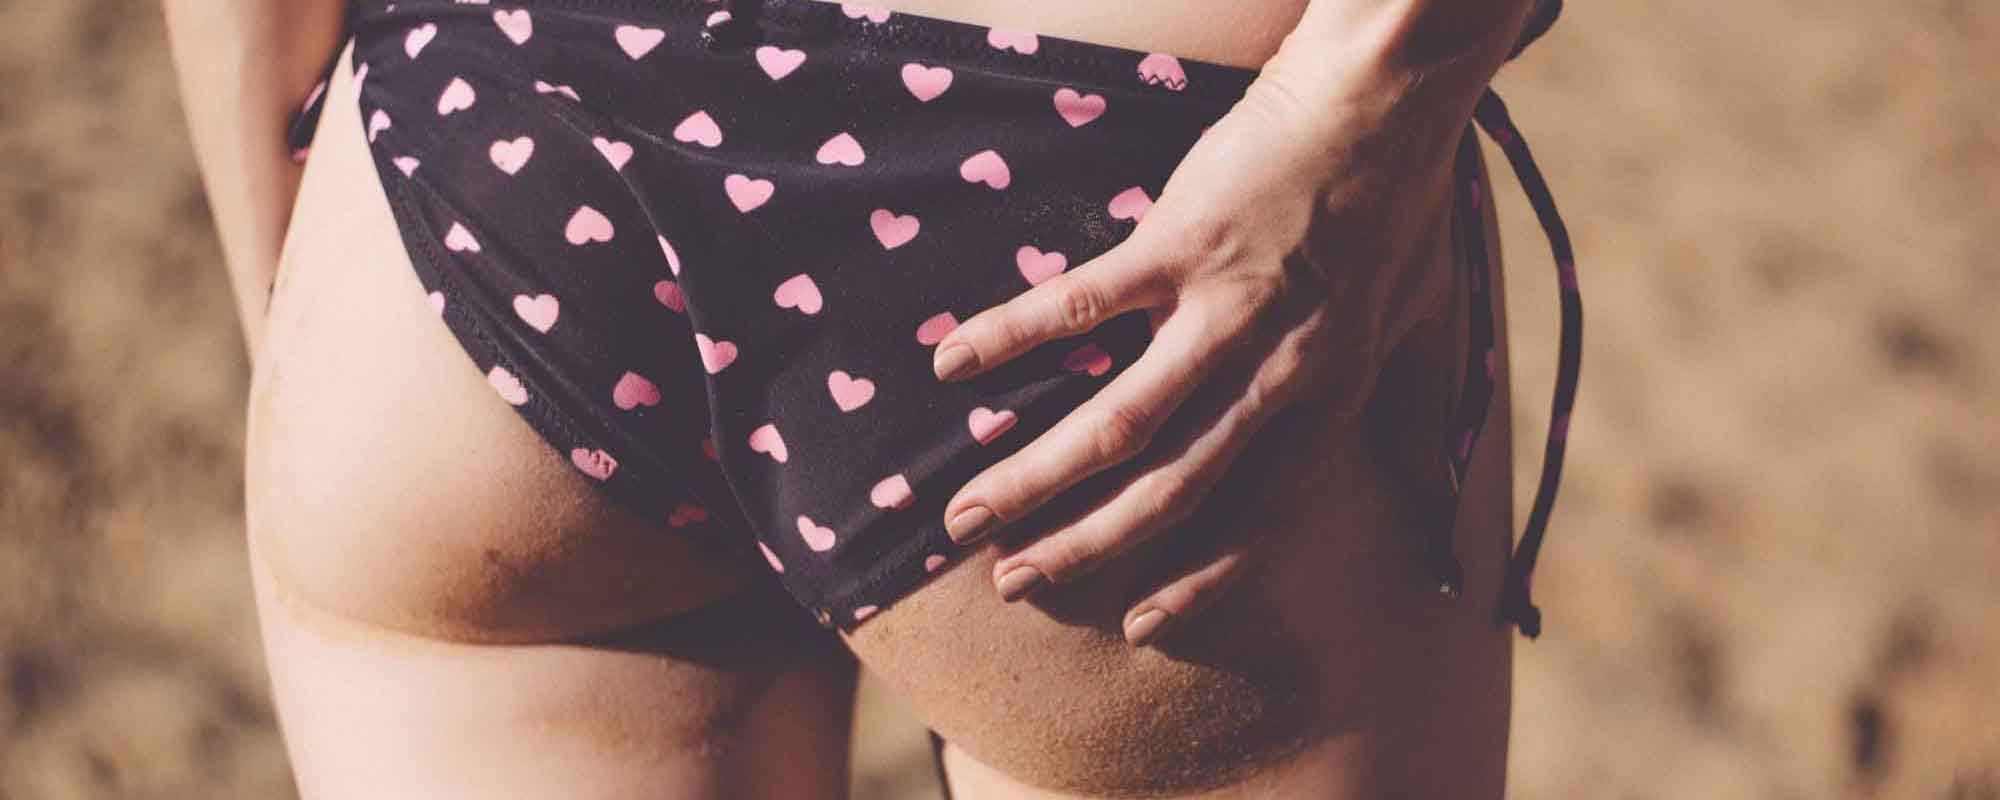 What to Expect after Brazilian Butt Lift Surgery - Brazilian Butt Lift  Recovery Tips - Providence, RI